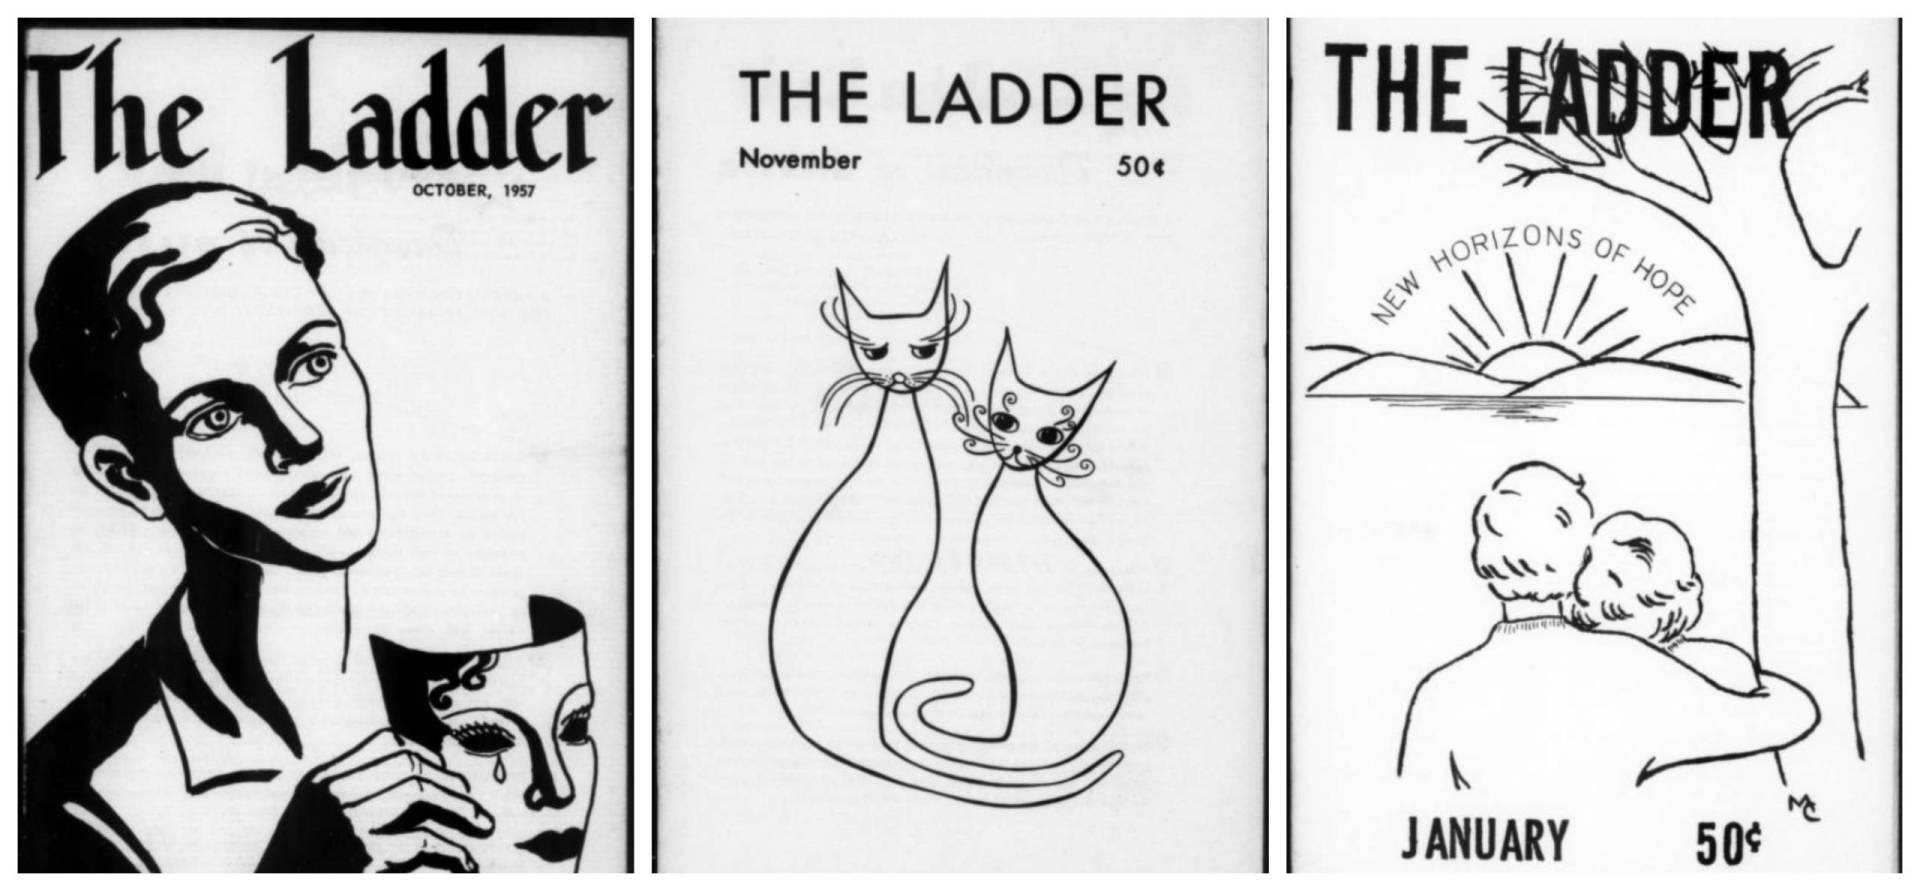 Three black and white covers of magazines. The first shows an androgynous person, the second features two cats, and the third is a sketch of a couple, viewed from behind, watching a sunset.